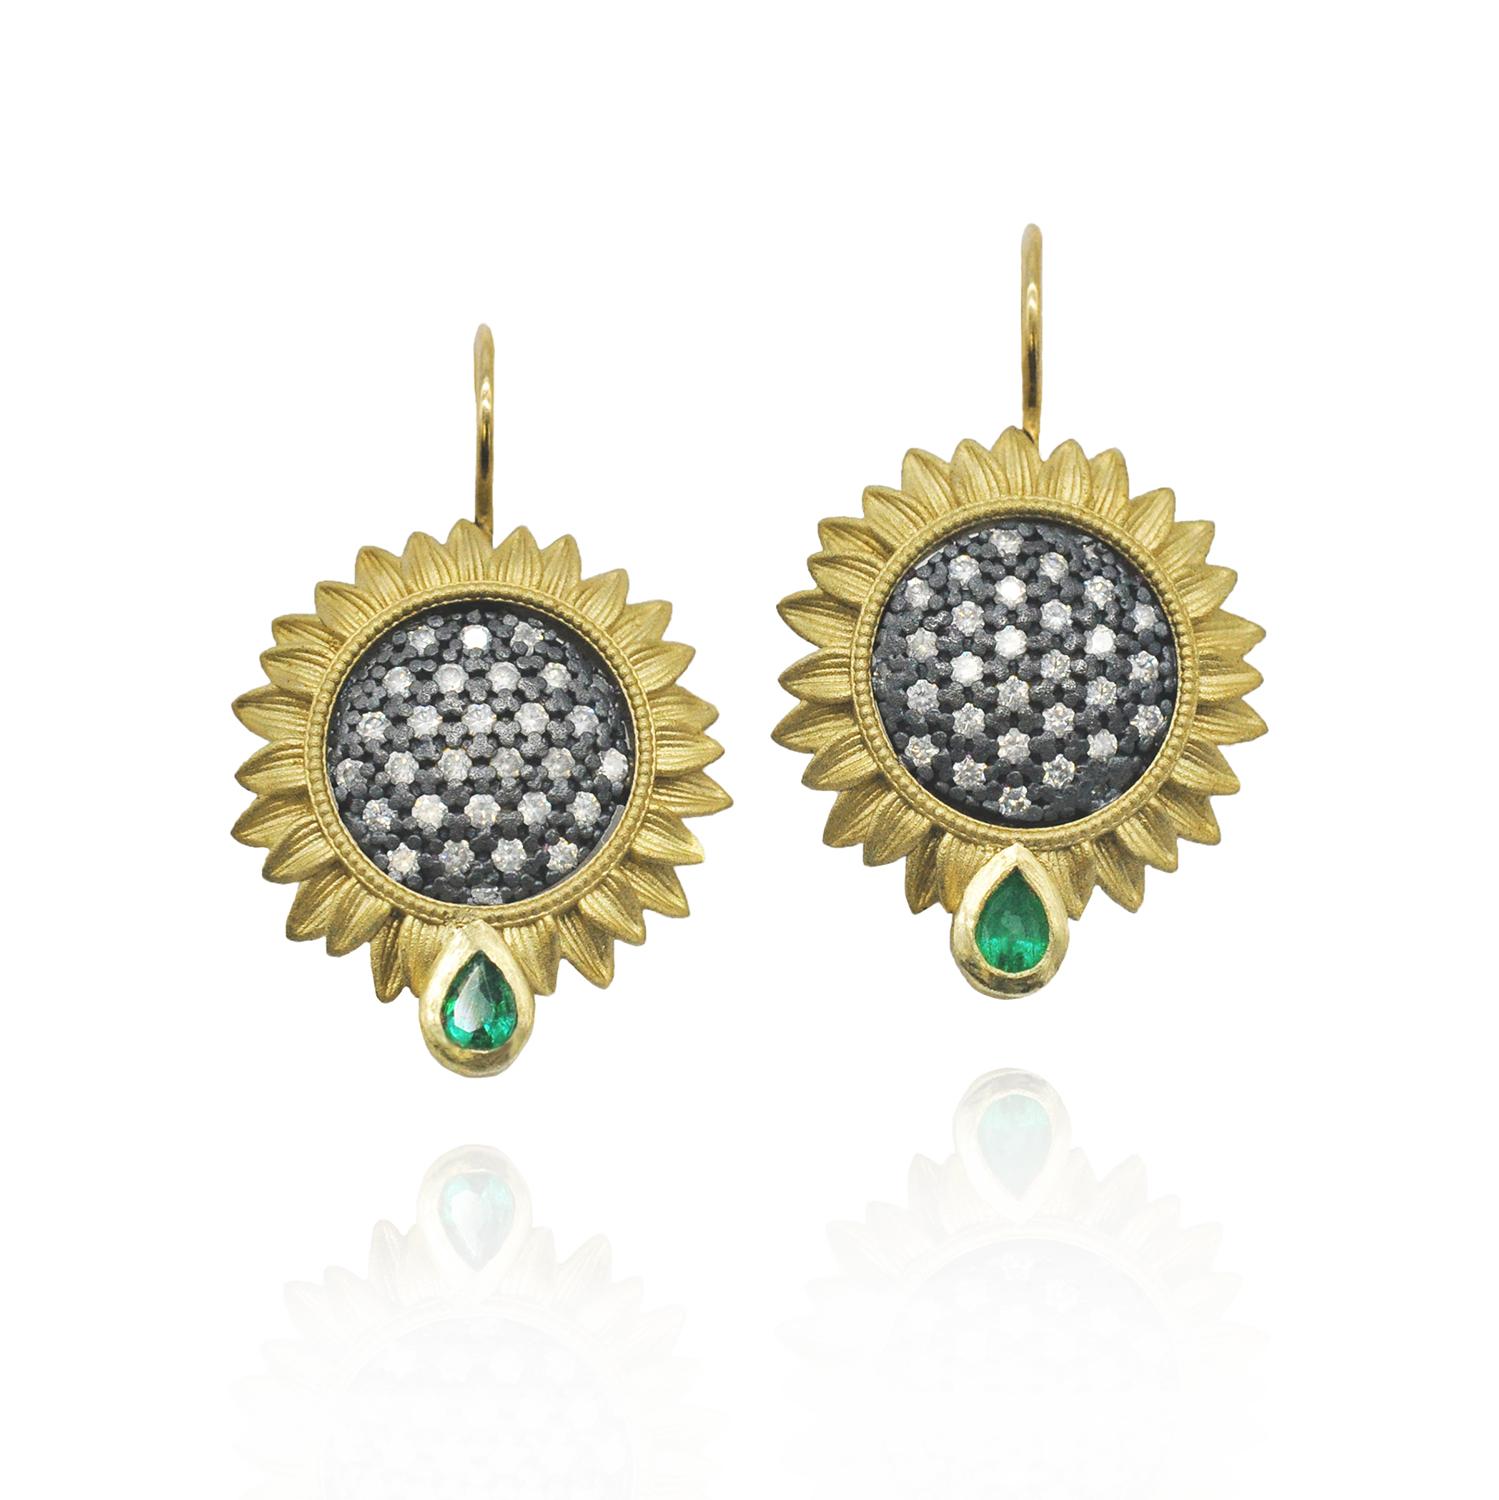 Pear Cut Sunflower Earrings with Pave Set Diamonds in Oxidized Silver with Emeralds, Med For Sale